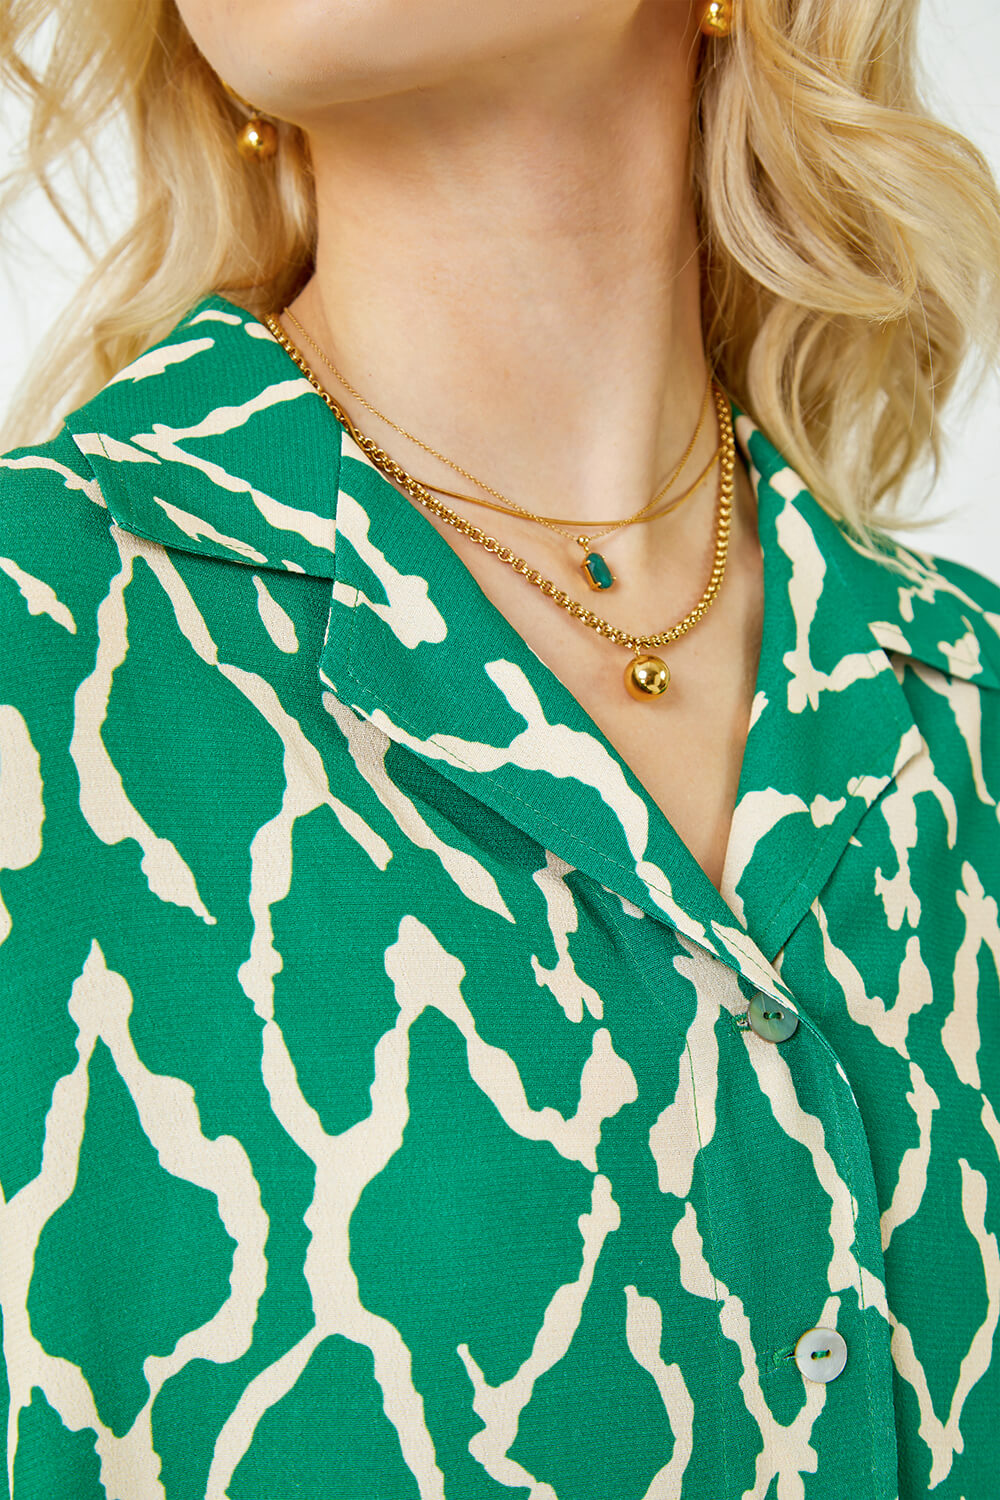 Green Relaxed Graphic Print Shirt, Image 5 of 5